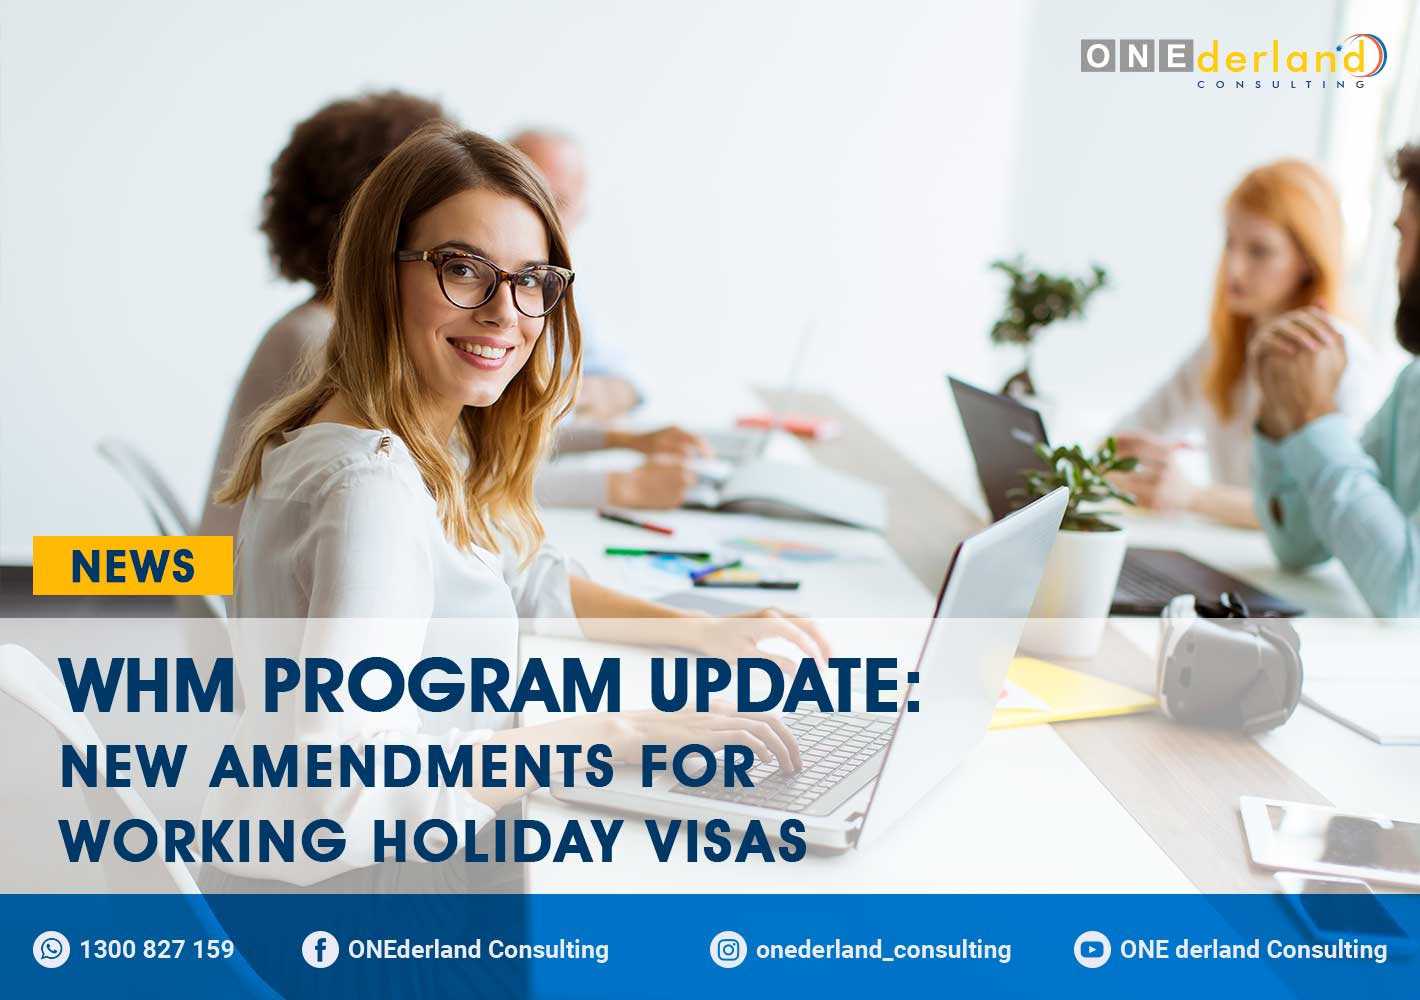 WHM Program Update New Amendments for Working Holiday Visas